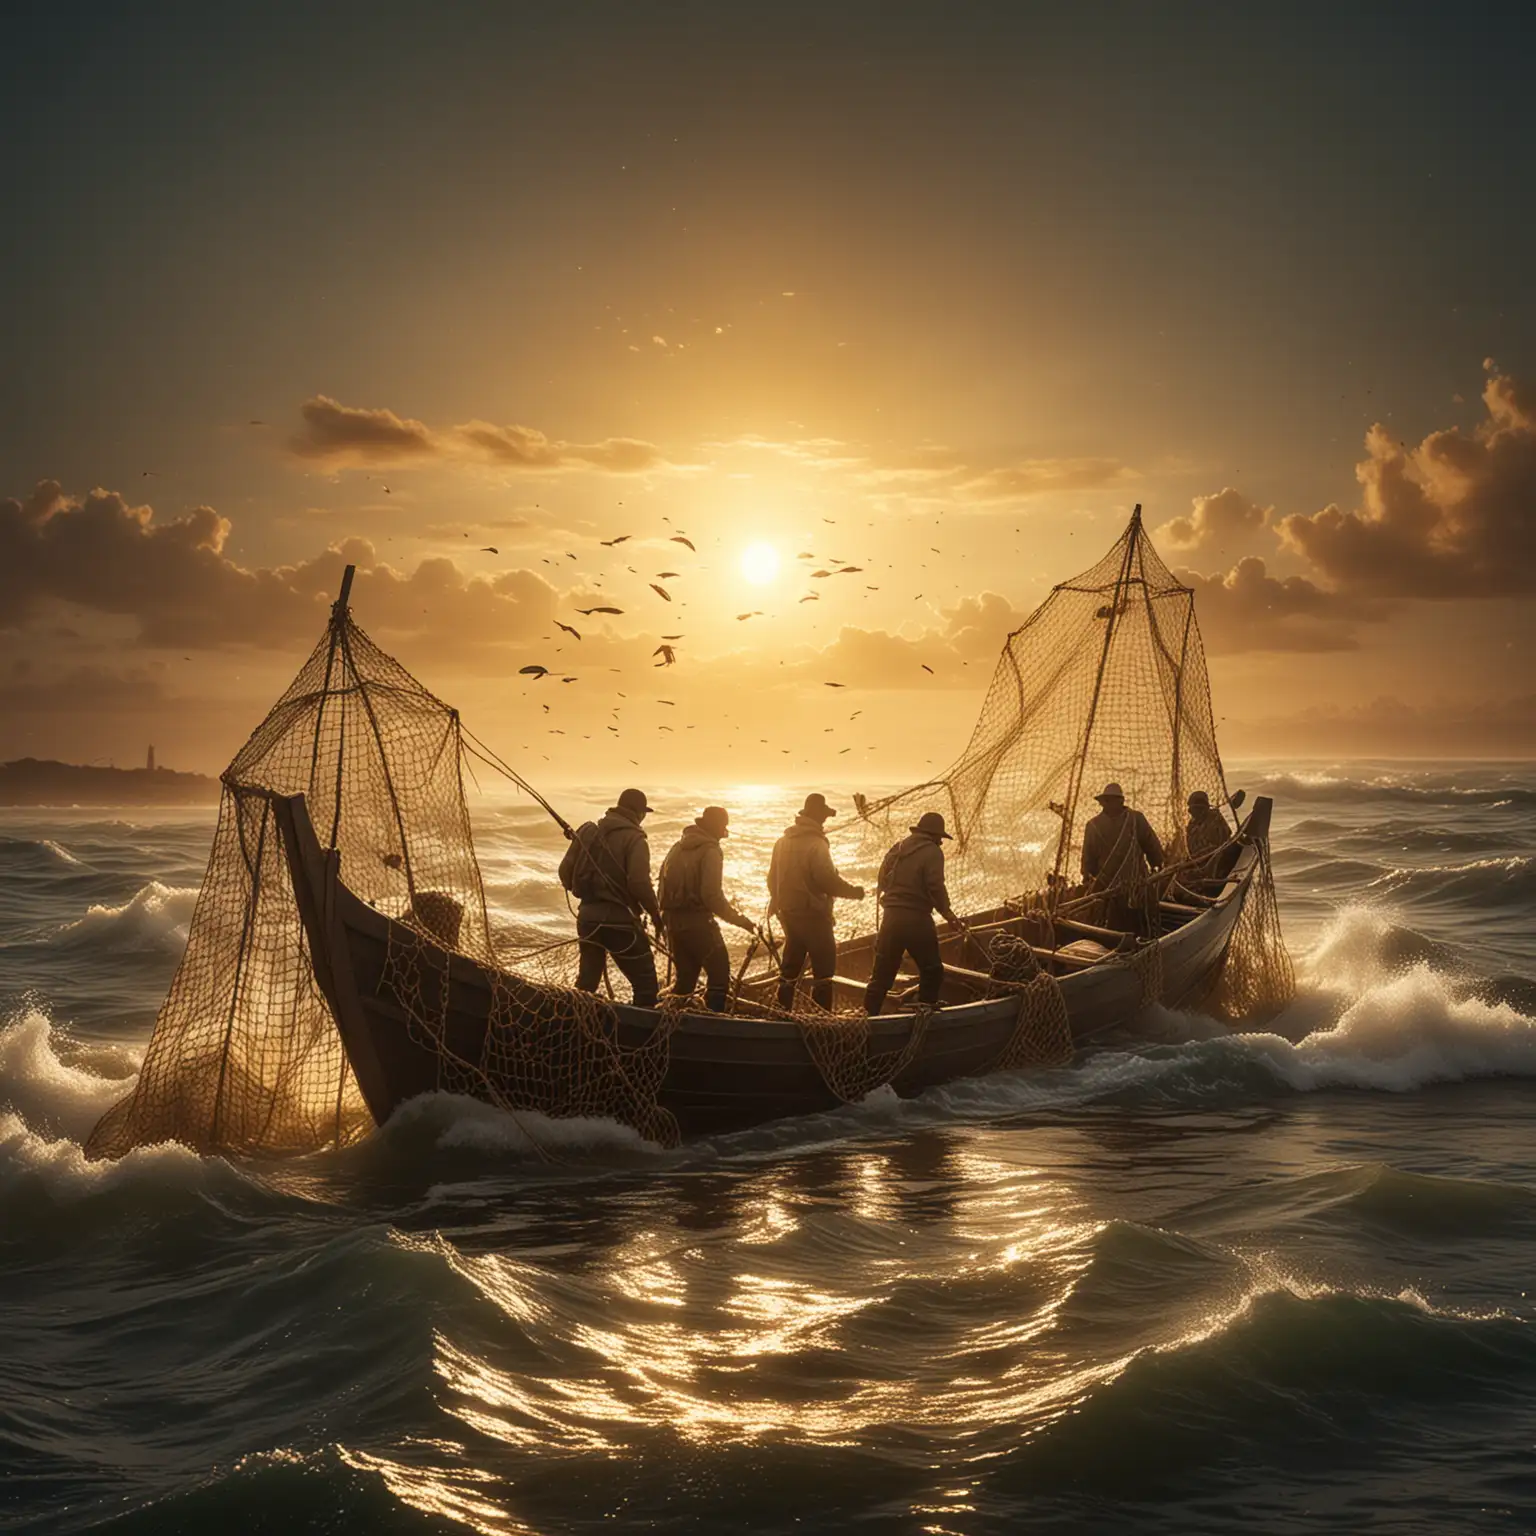 Fishermen in a Boat at Sea with Bountiful Nets under Golden Light